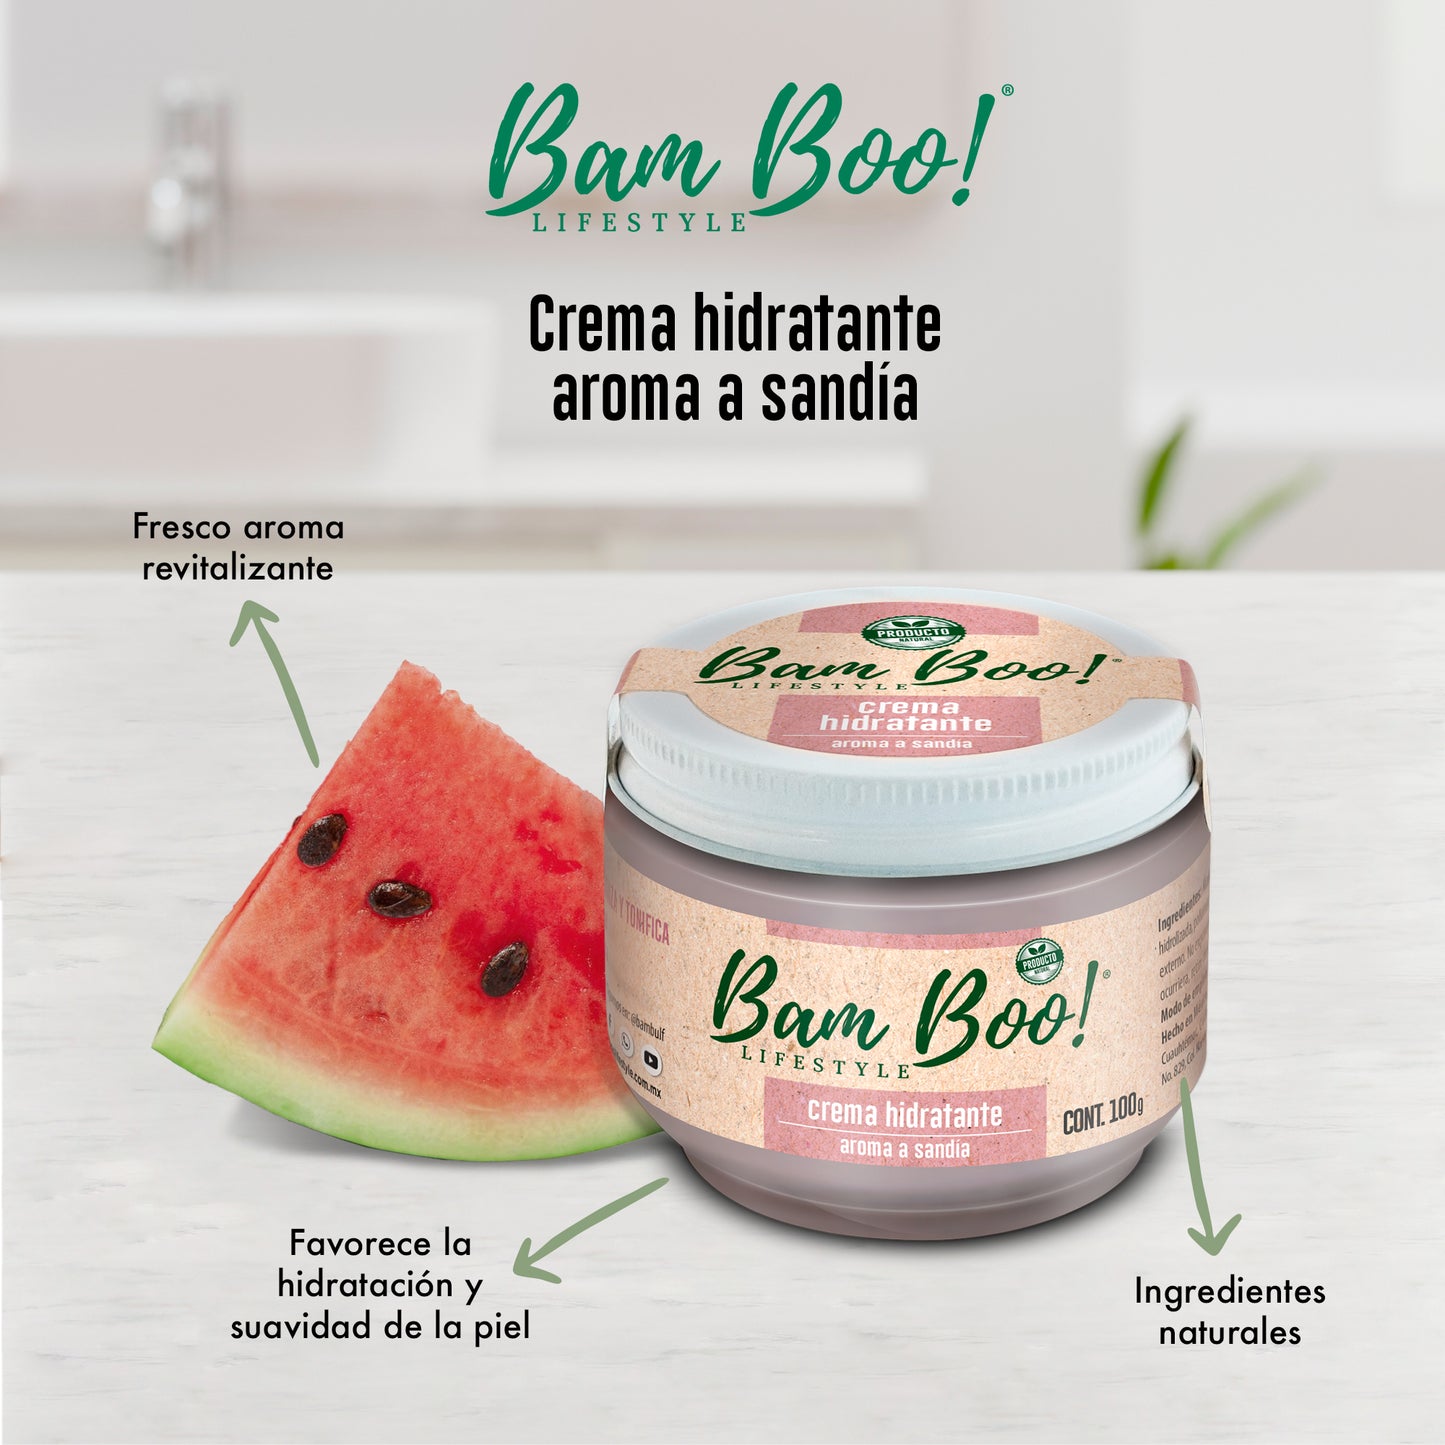 Watermelon Moisturizing Cream for Face and Body 100 g Bam Boo! Lifestyle